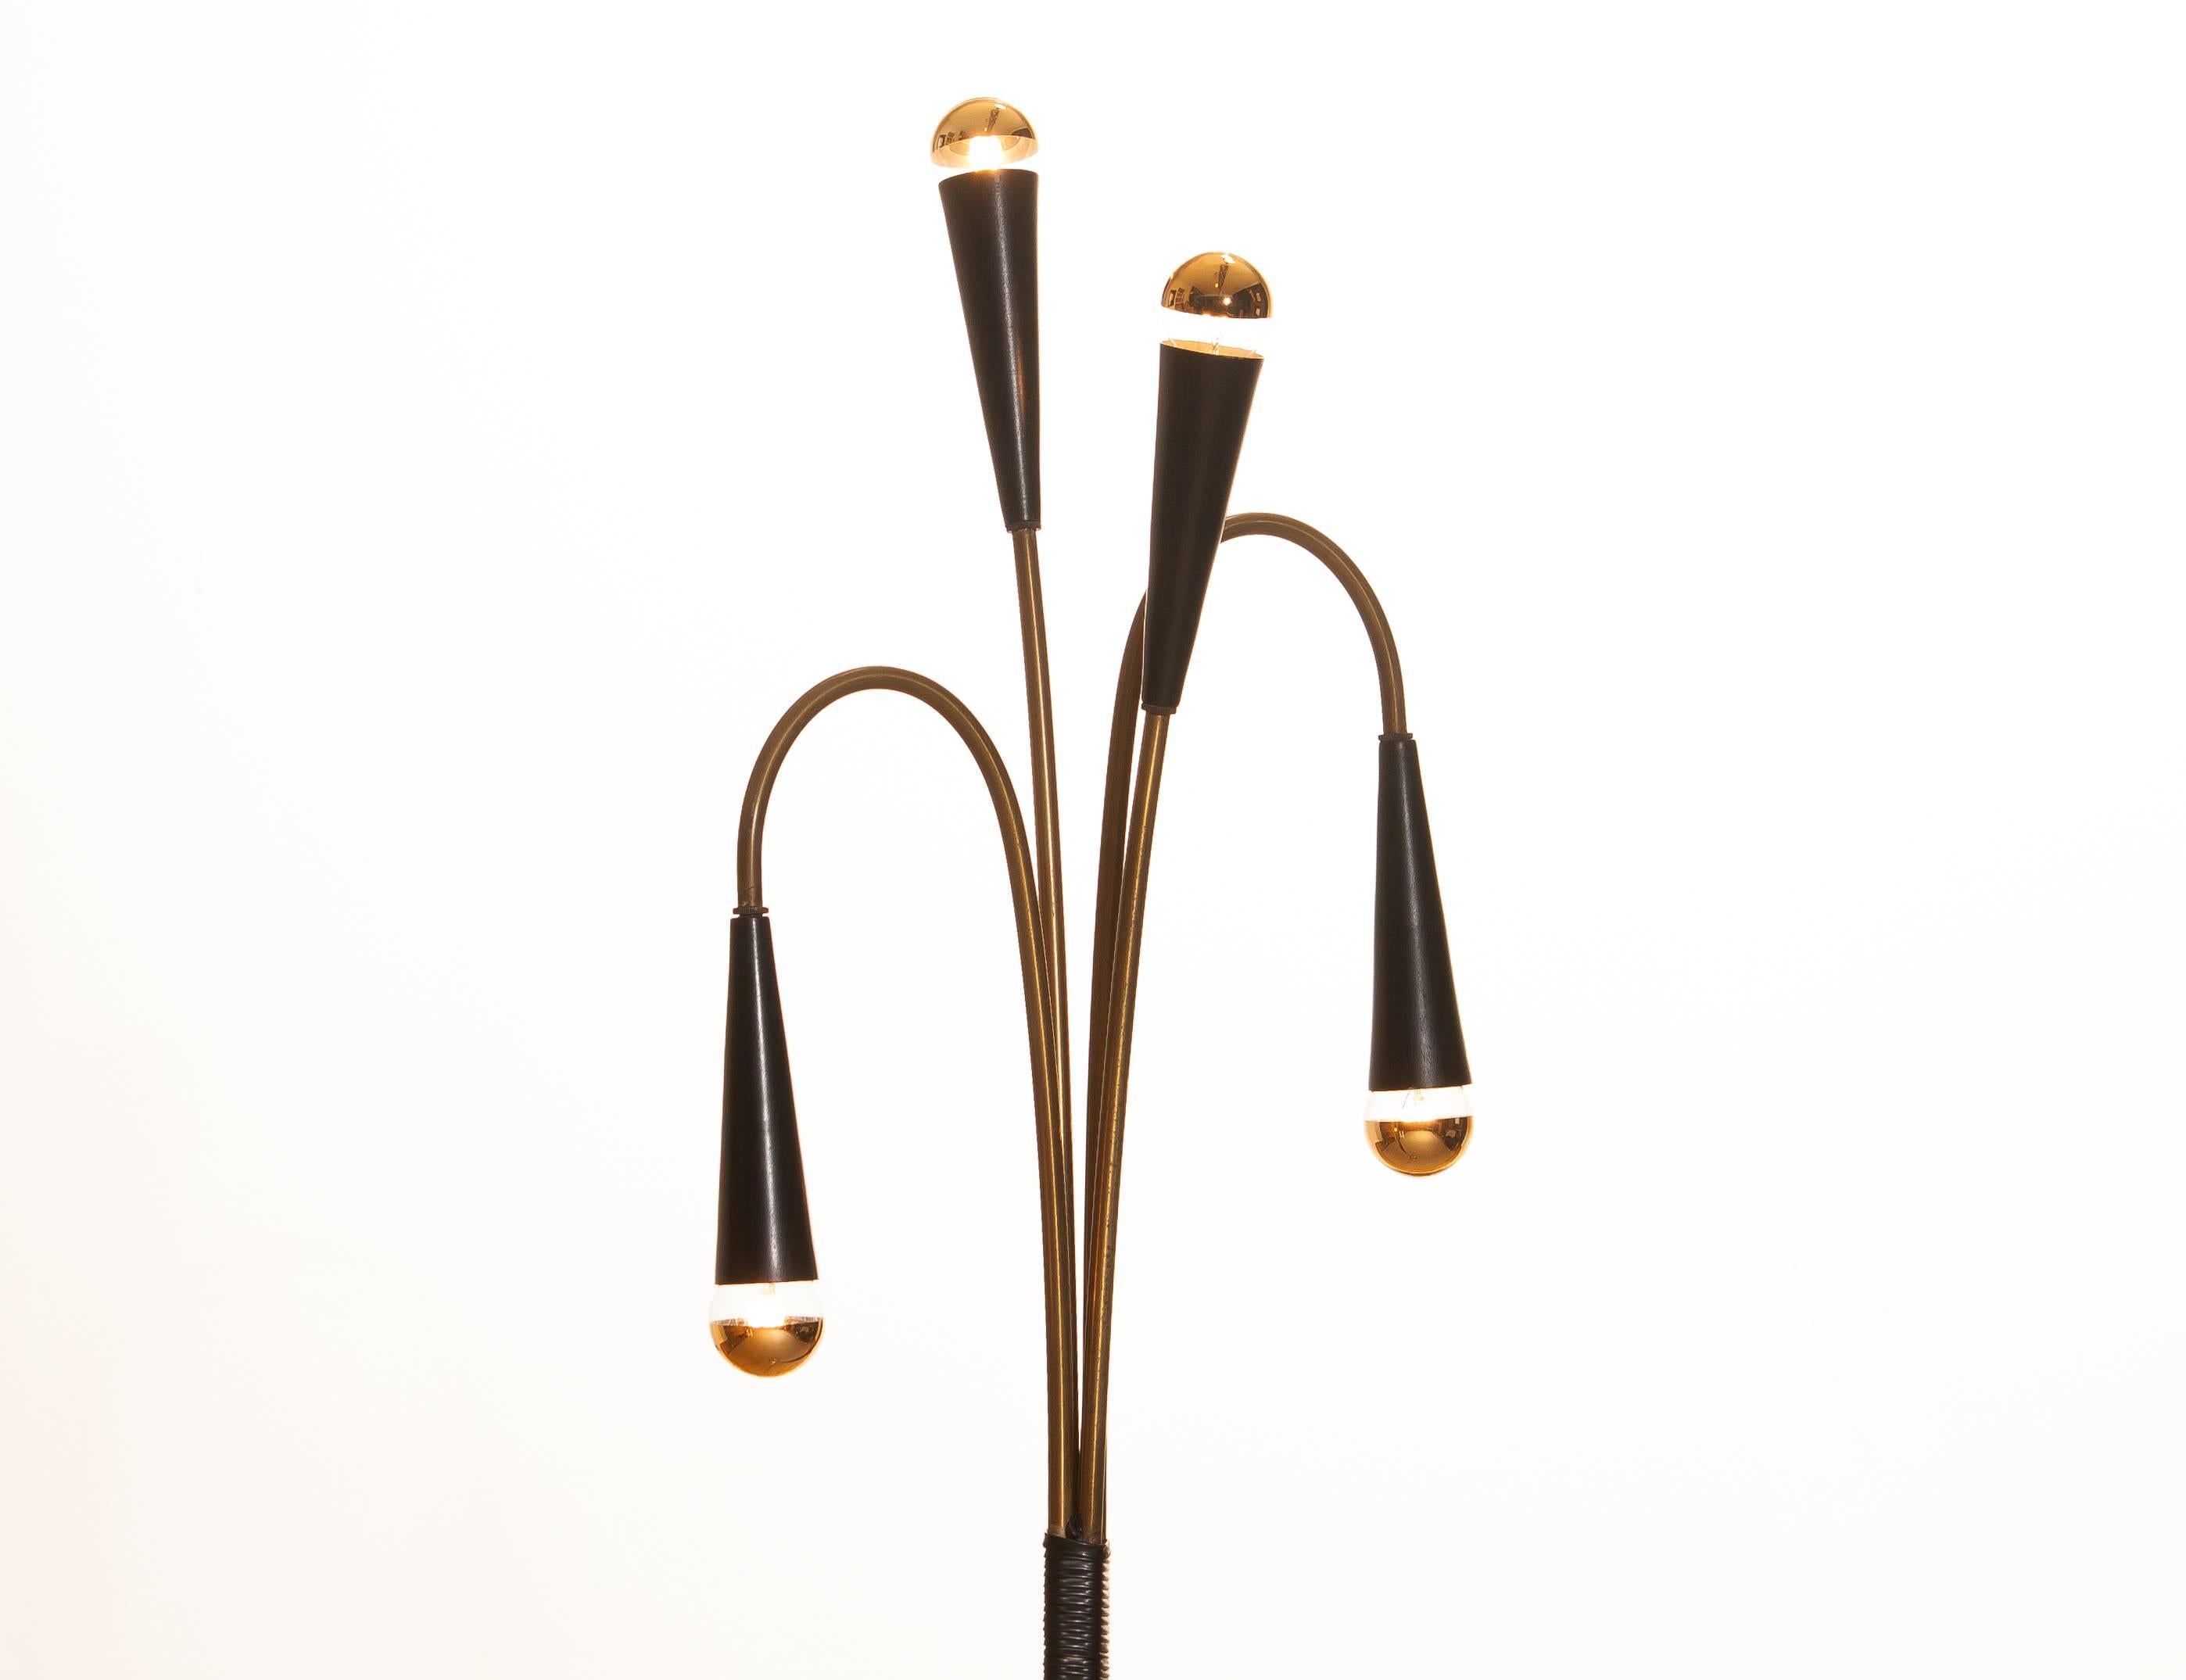 Beautiful and rare floor lamp made by Lumi.
Designed by Oscar Torlasco.
This lamp is made of brass with black lacquered metal details.
It is in an original condition and technical 100%.
Period 1960s.
Dimensions: H 140 cm, W 39 cm.